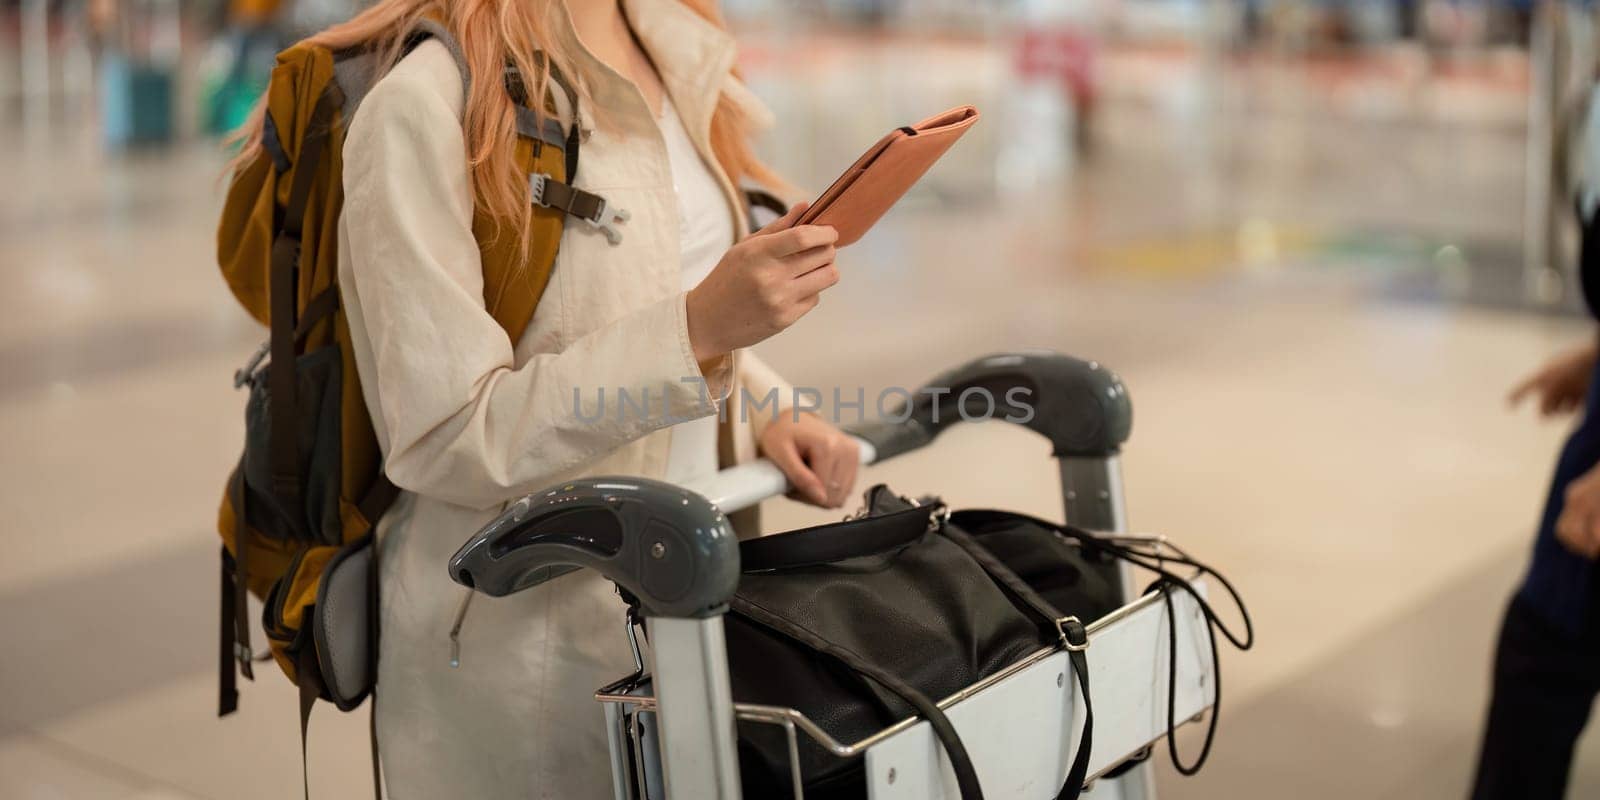 Hand of woman passenger holding passport with the flight in airport terminal.